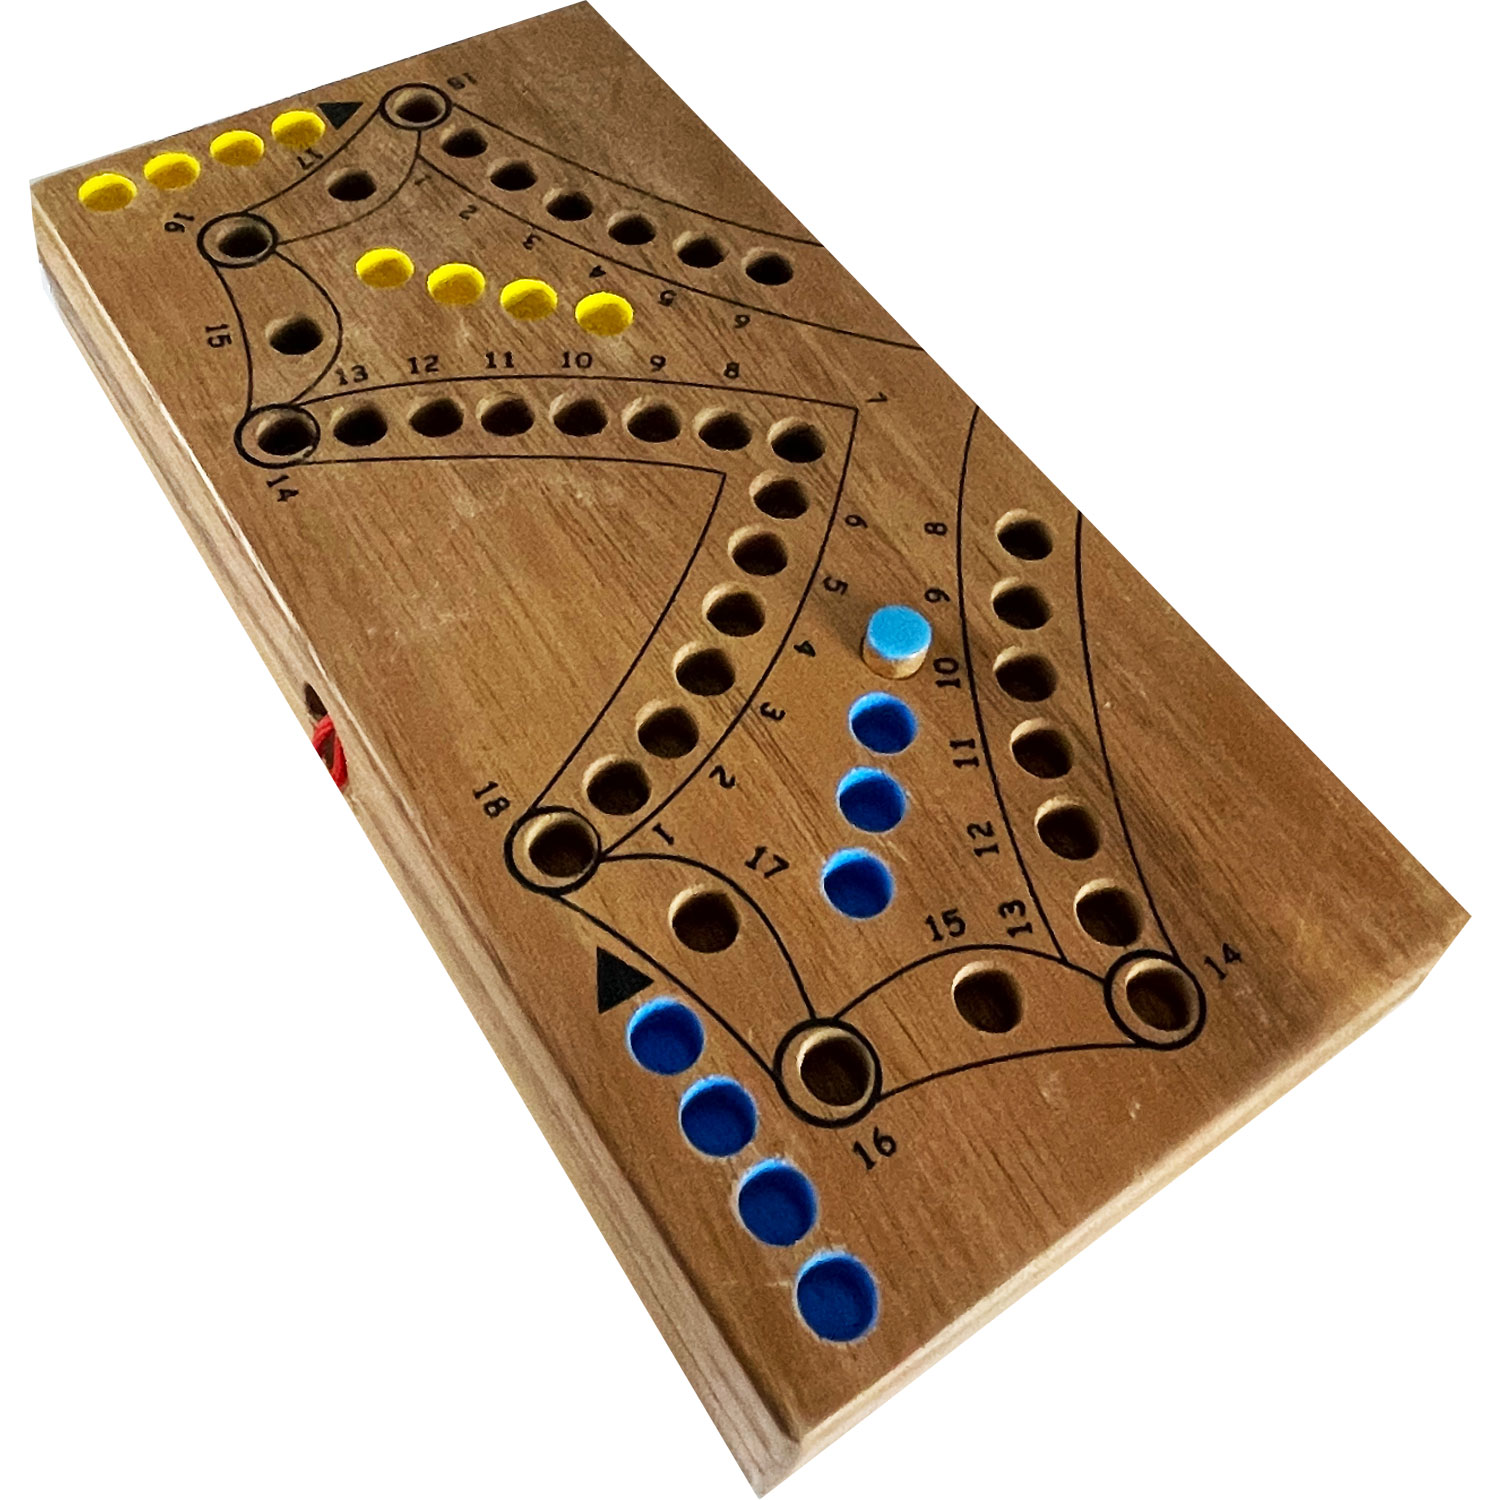 Production of games or wooden elements for games